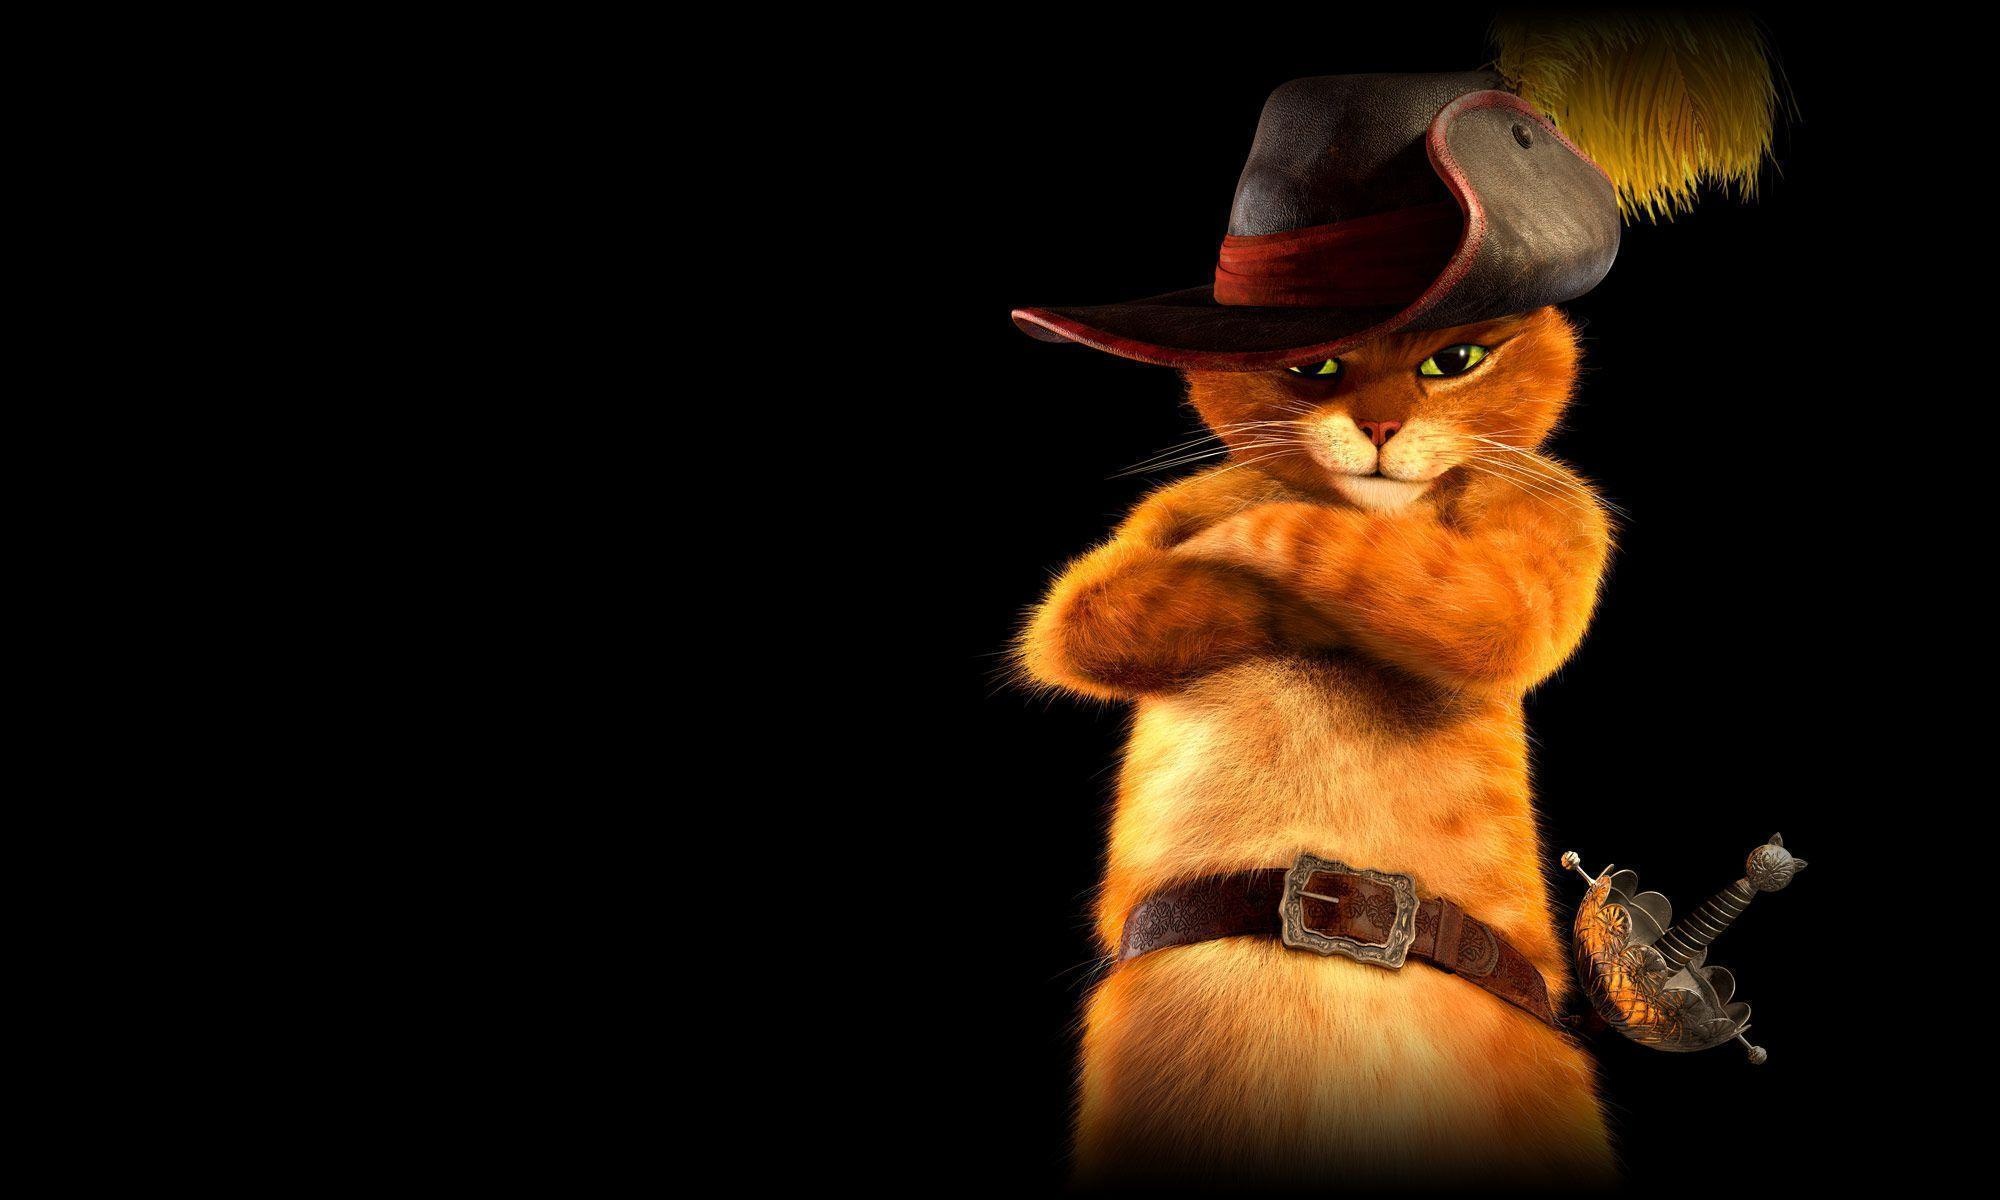 Puss in Boots, The Last Wish animation, Top free wallpapers, Animated film, 2000x1200 HD Desktop